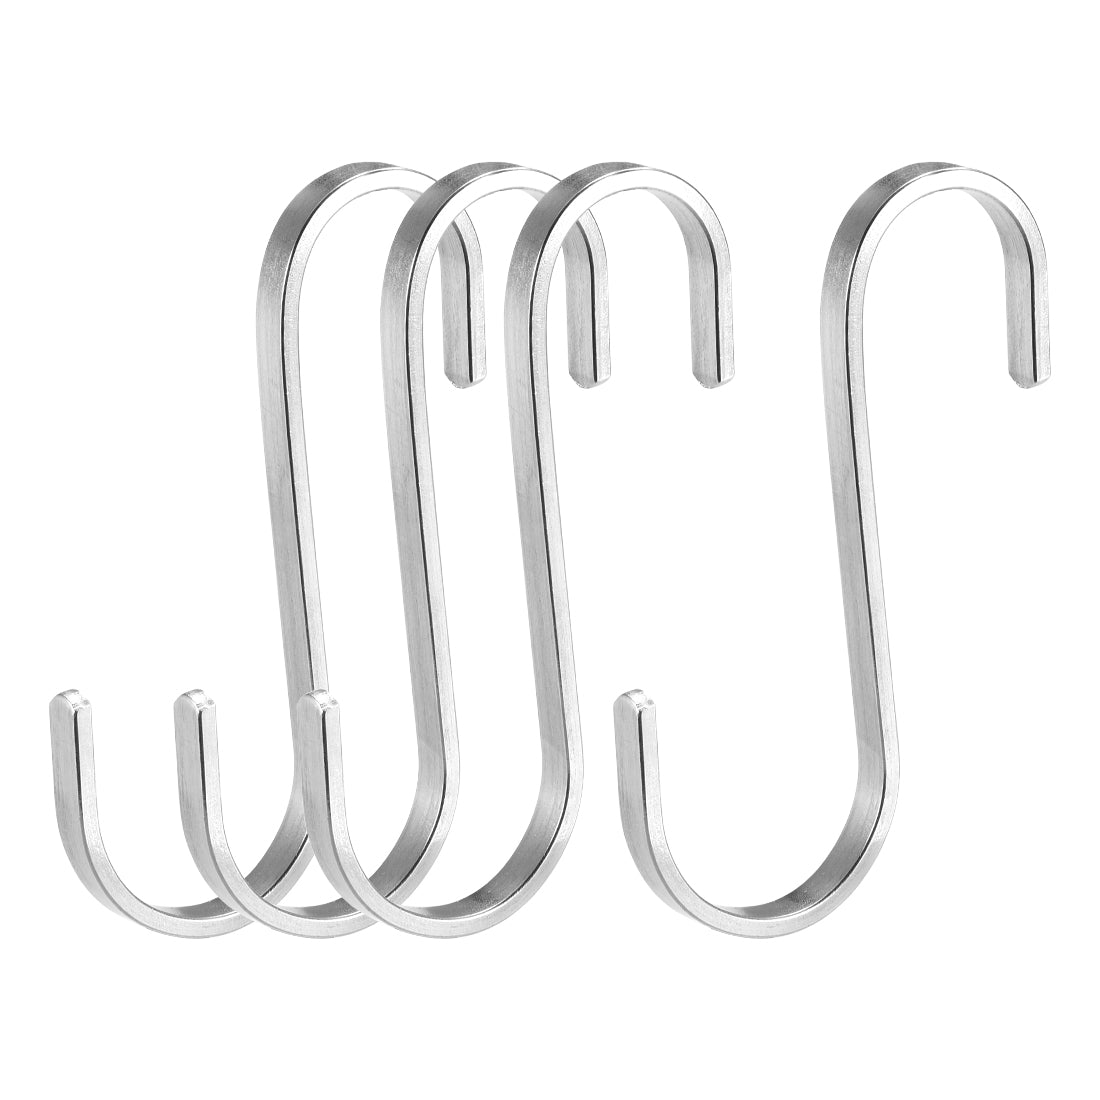 uxcell Uxcell Stainless Steel S Hooks 3.15" Flat S Shaped Hook Hangers 4pcs